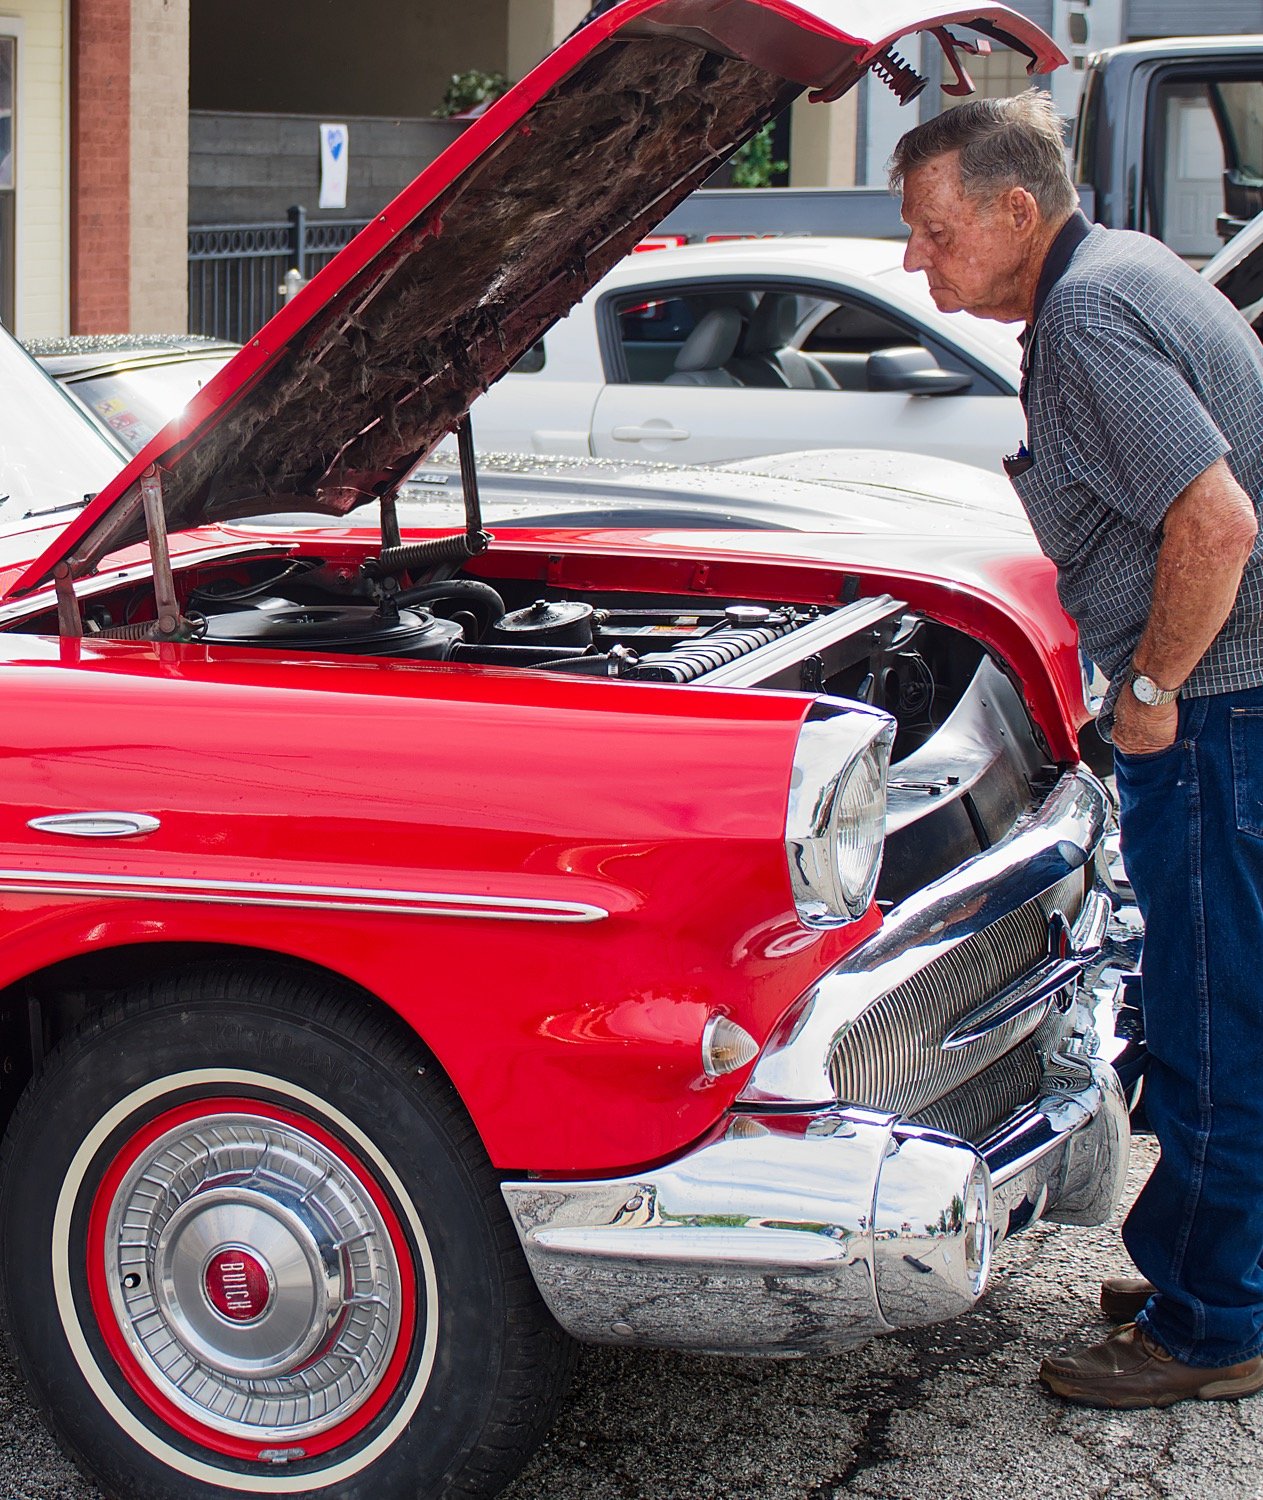 A 1957 Buick Roadmaster drew attention Saturday morning at the car show in Quitman.